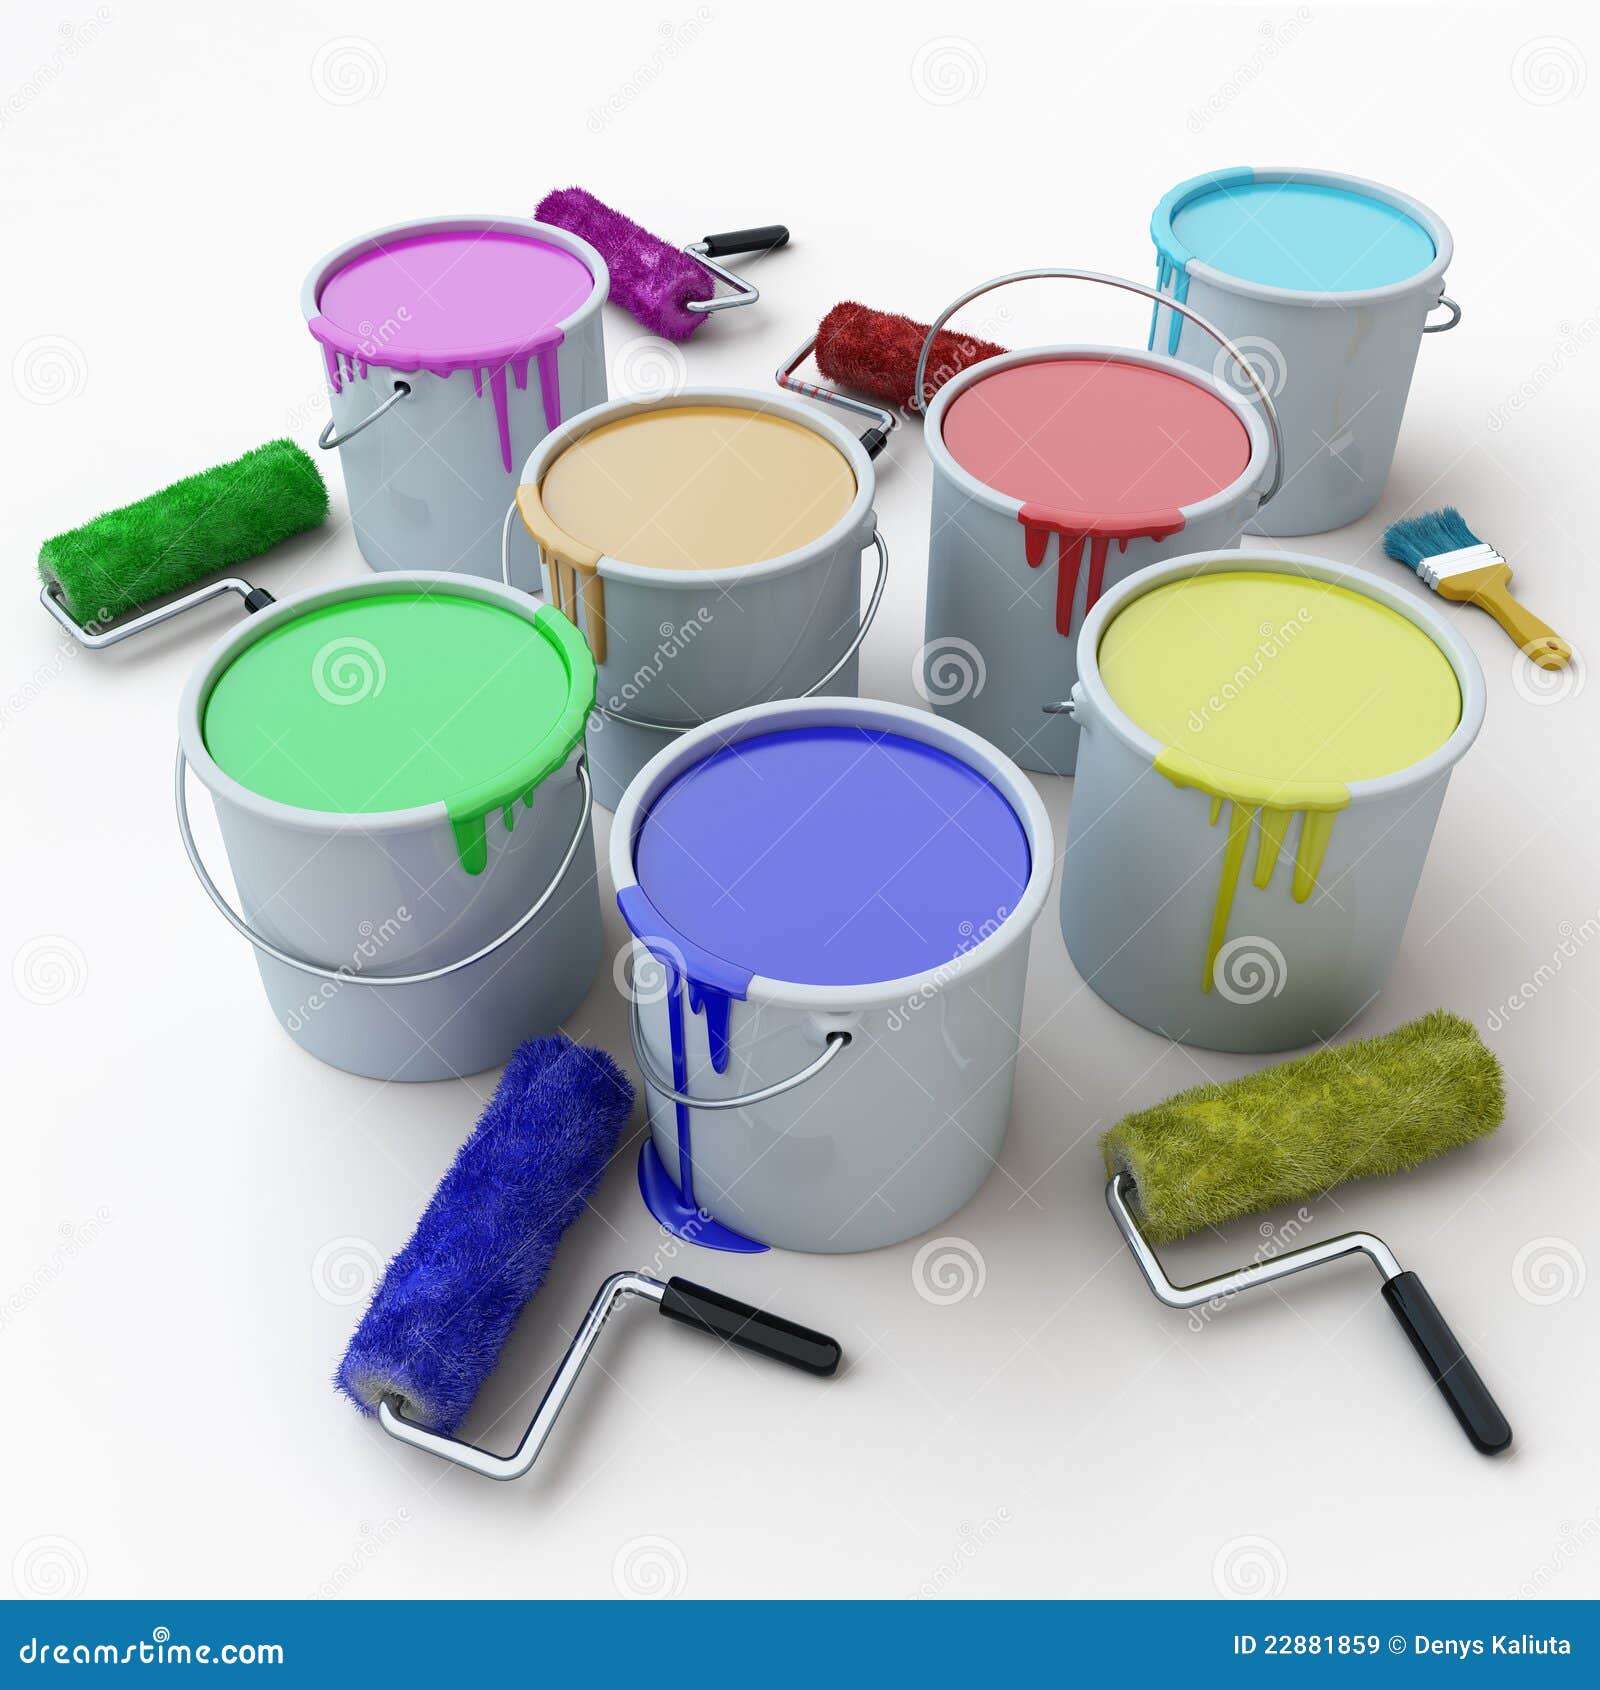 buckets with paints3